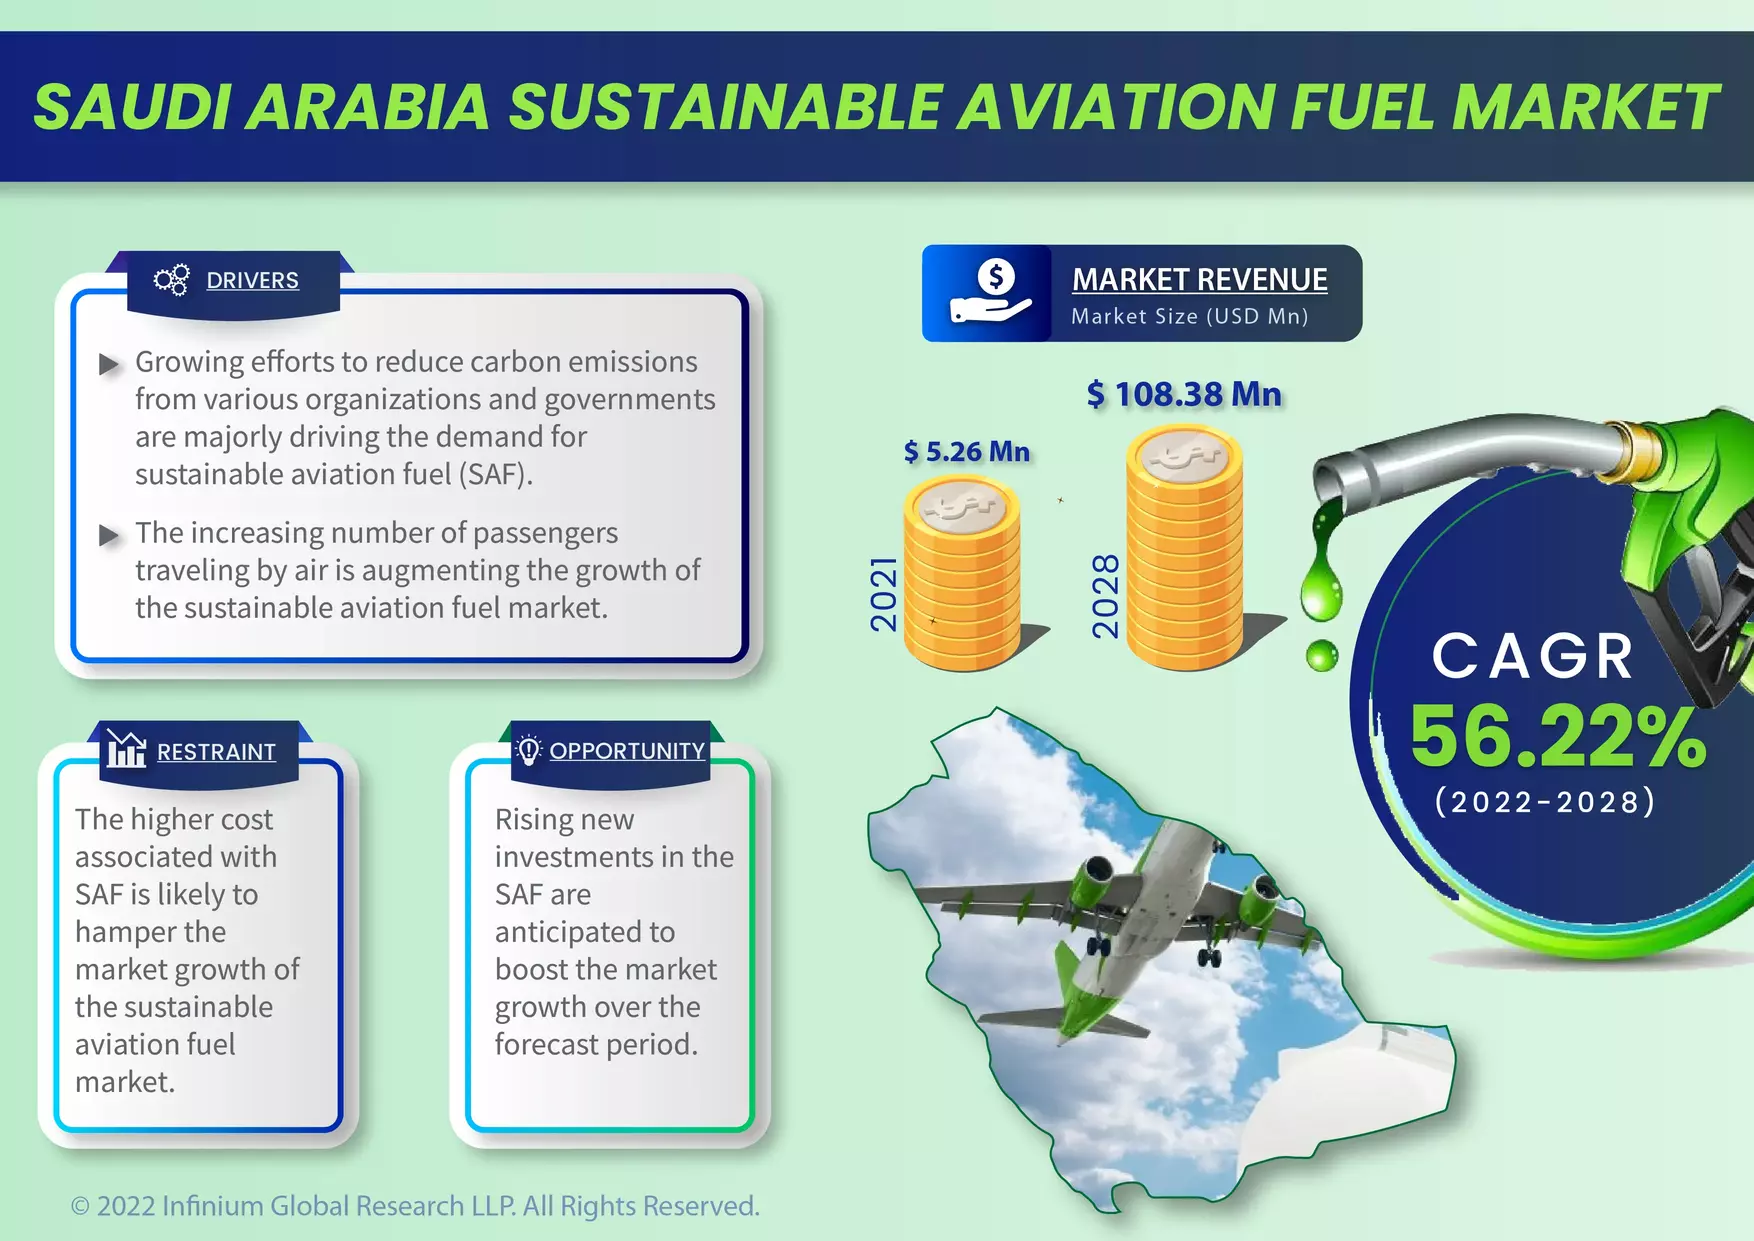 Saudi Arabia Sustainable Aviation Fuel Was Valued at USD 5.26 Million in 2021 and is Expected to Reach USD 108.38 Million by 2028 and Grow at a CAGR of 56.22% Over the Forecast Period 2022-2028.